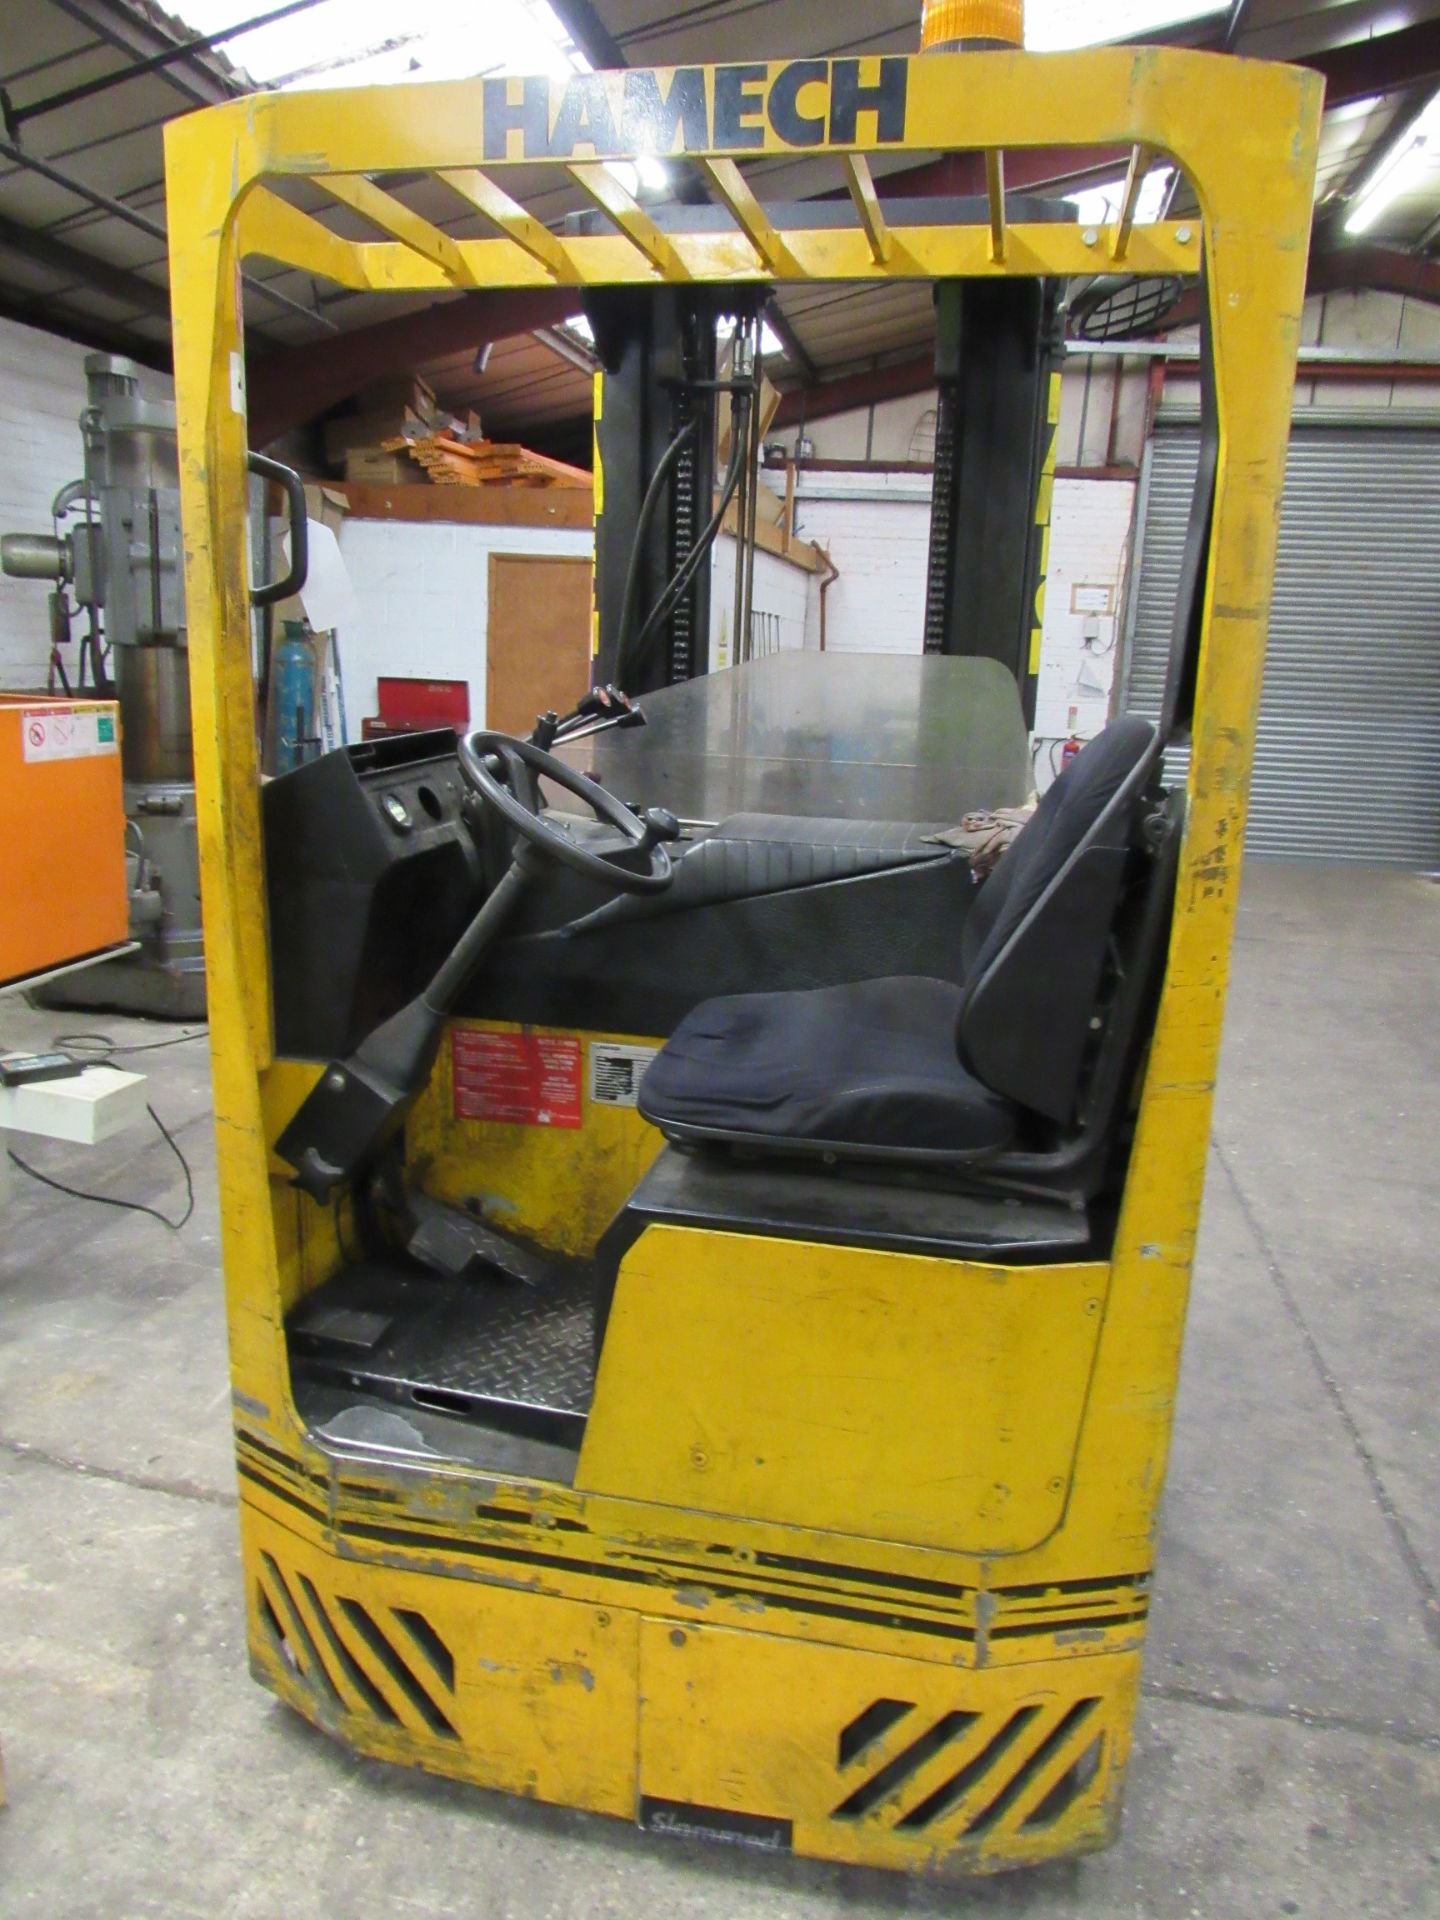 Hamech RS-225 Battery Electric Reach Truck, 1997, - Image 4 of 11